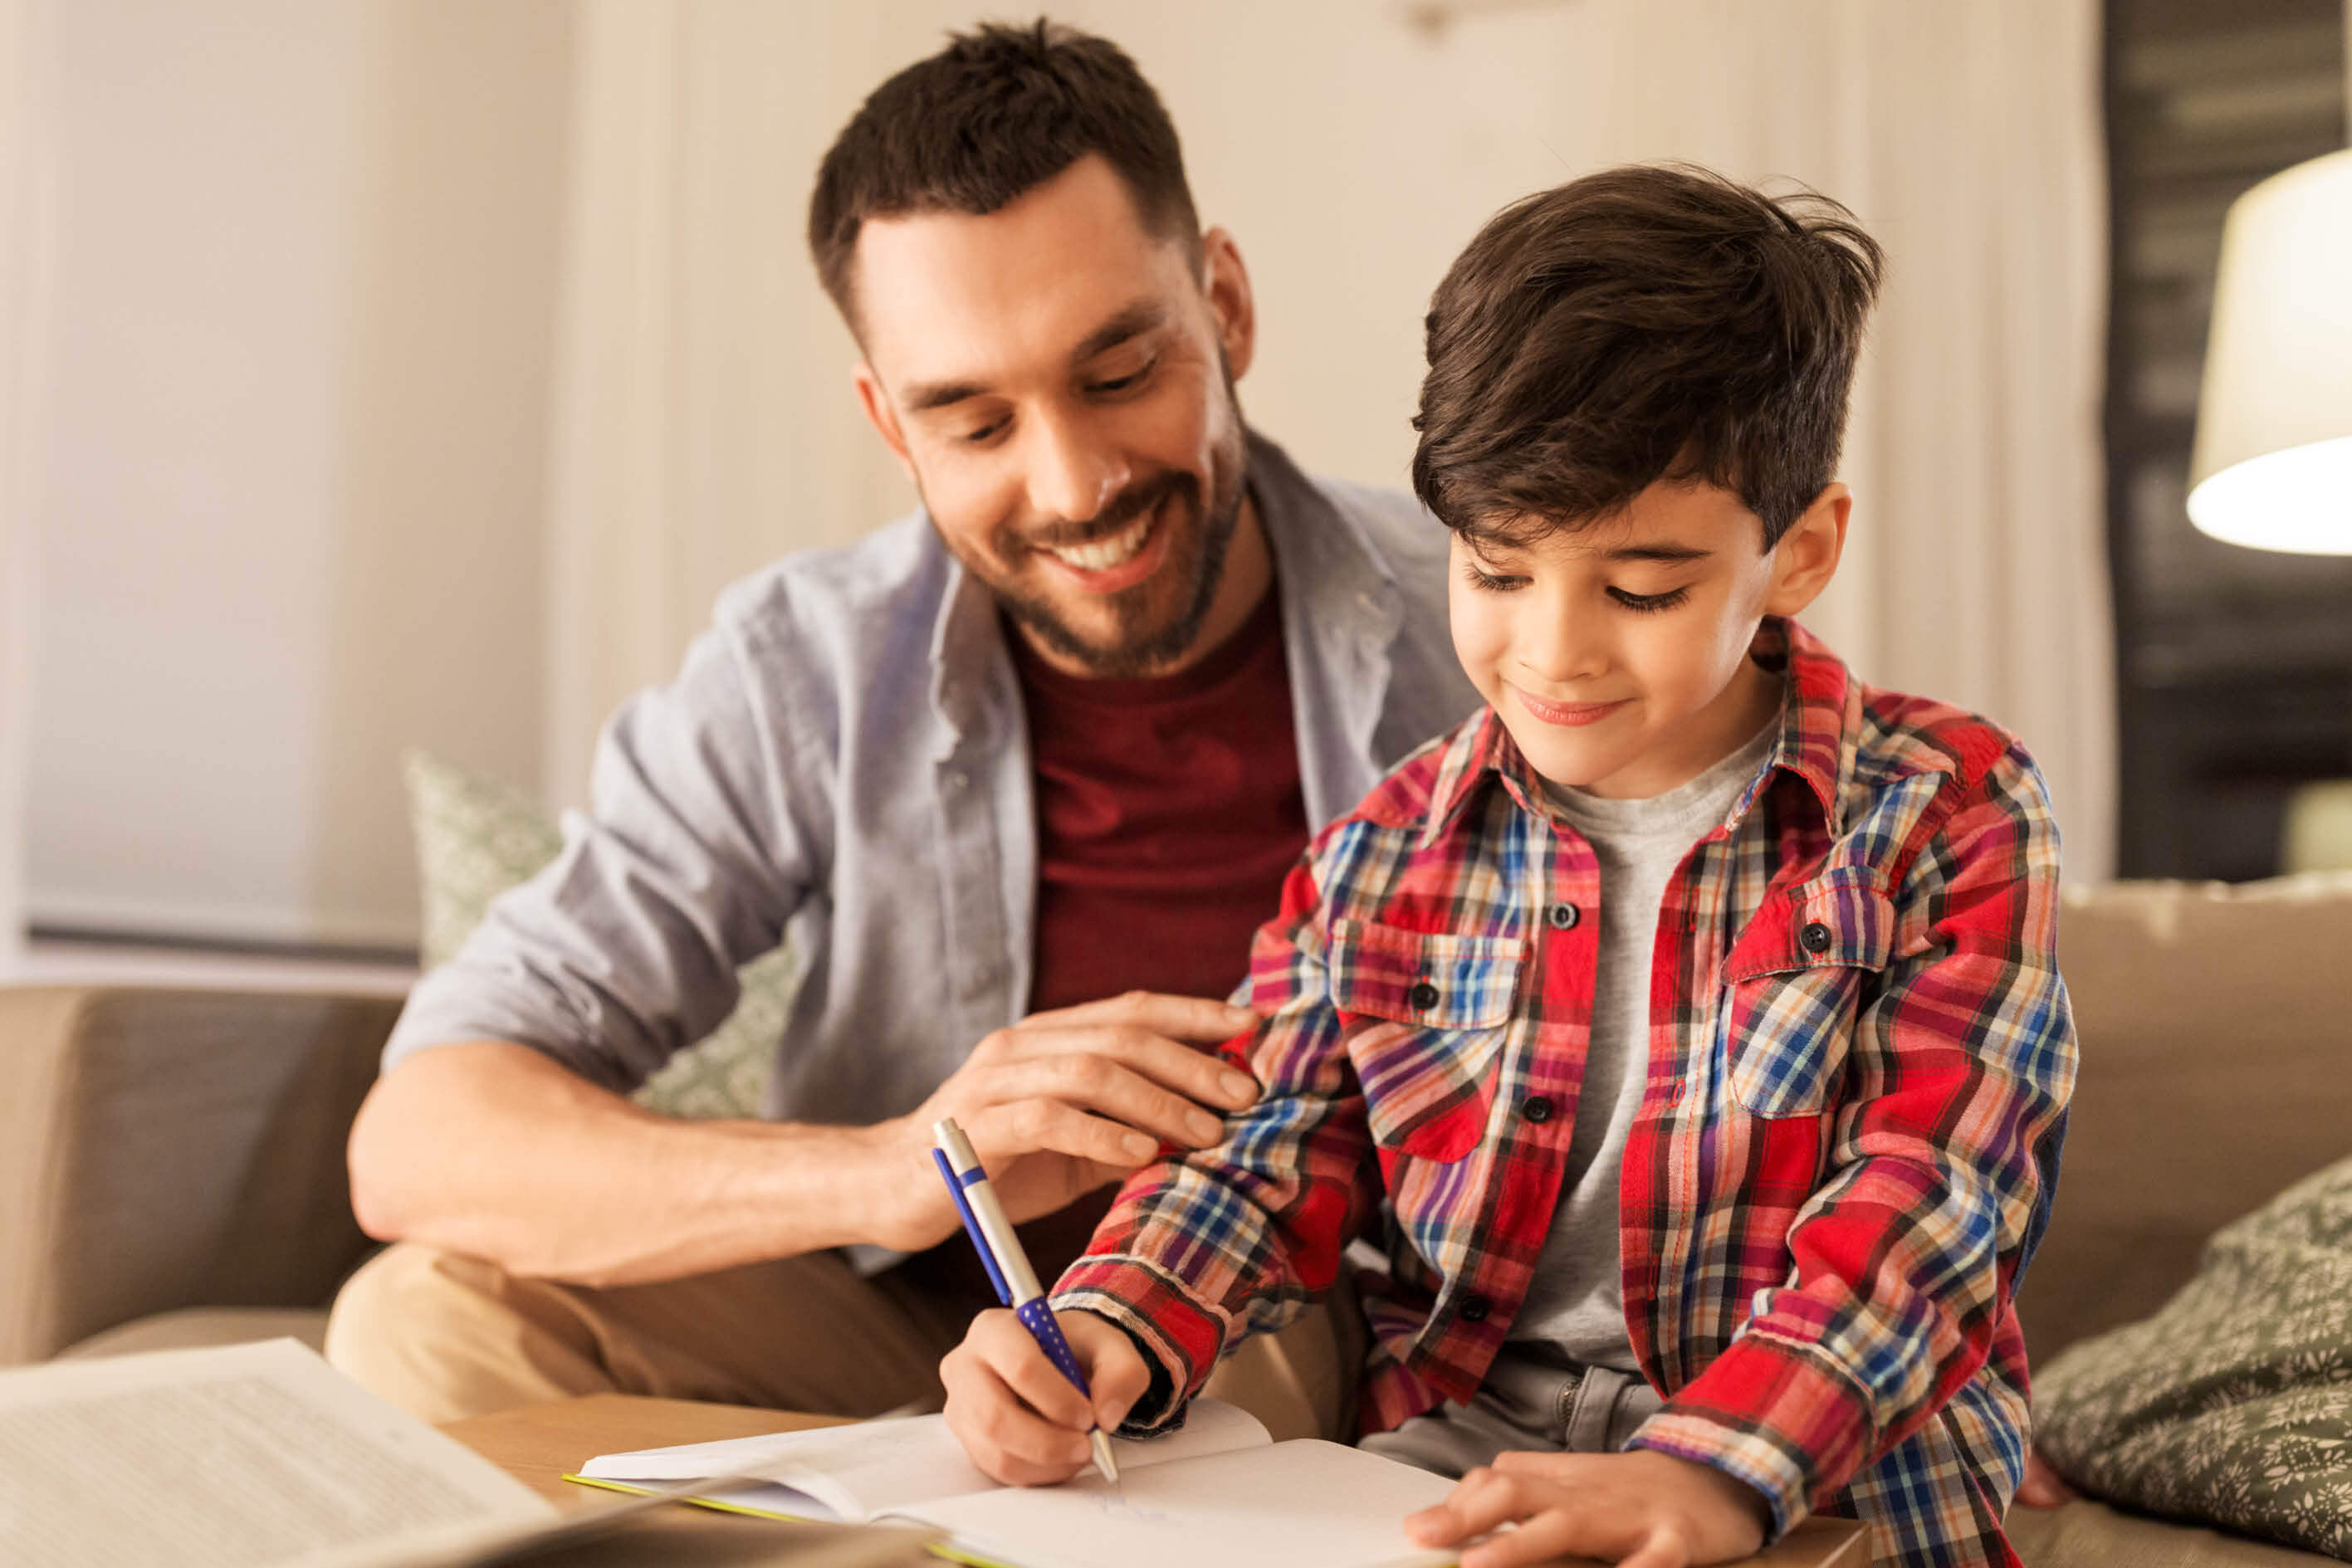 Male parent and young boy holding pencil working together on an assigment